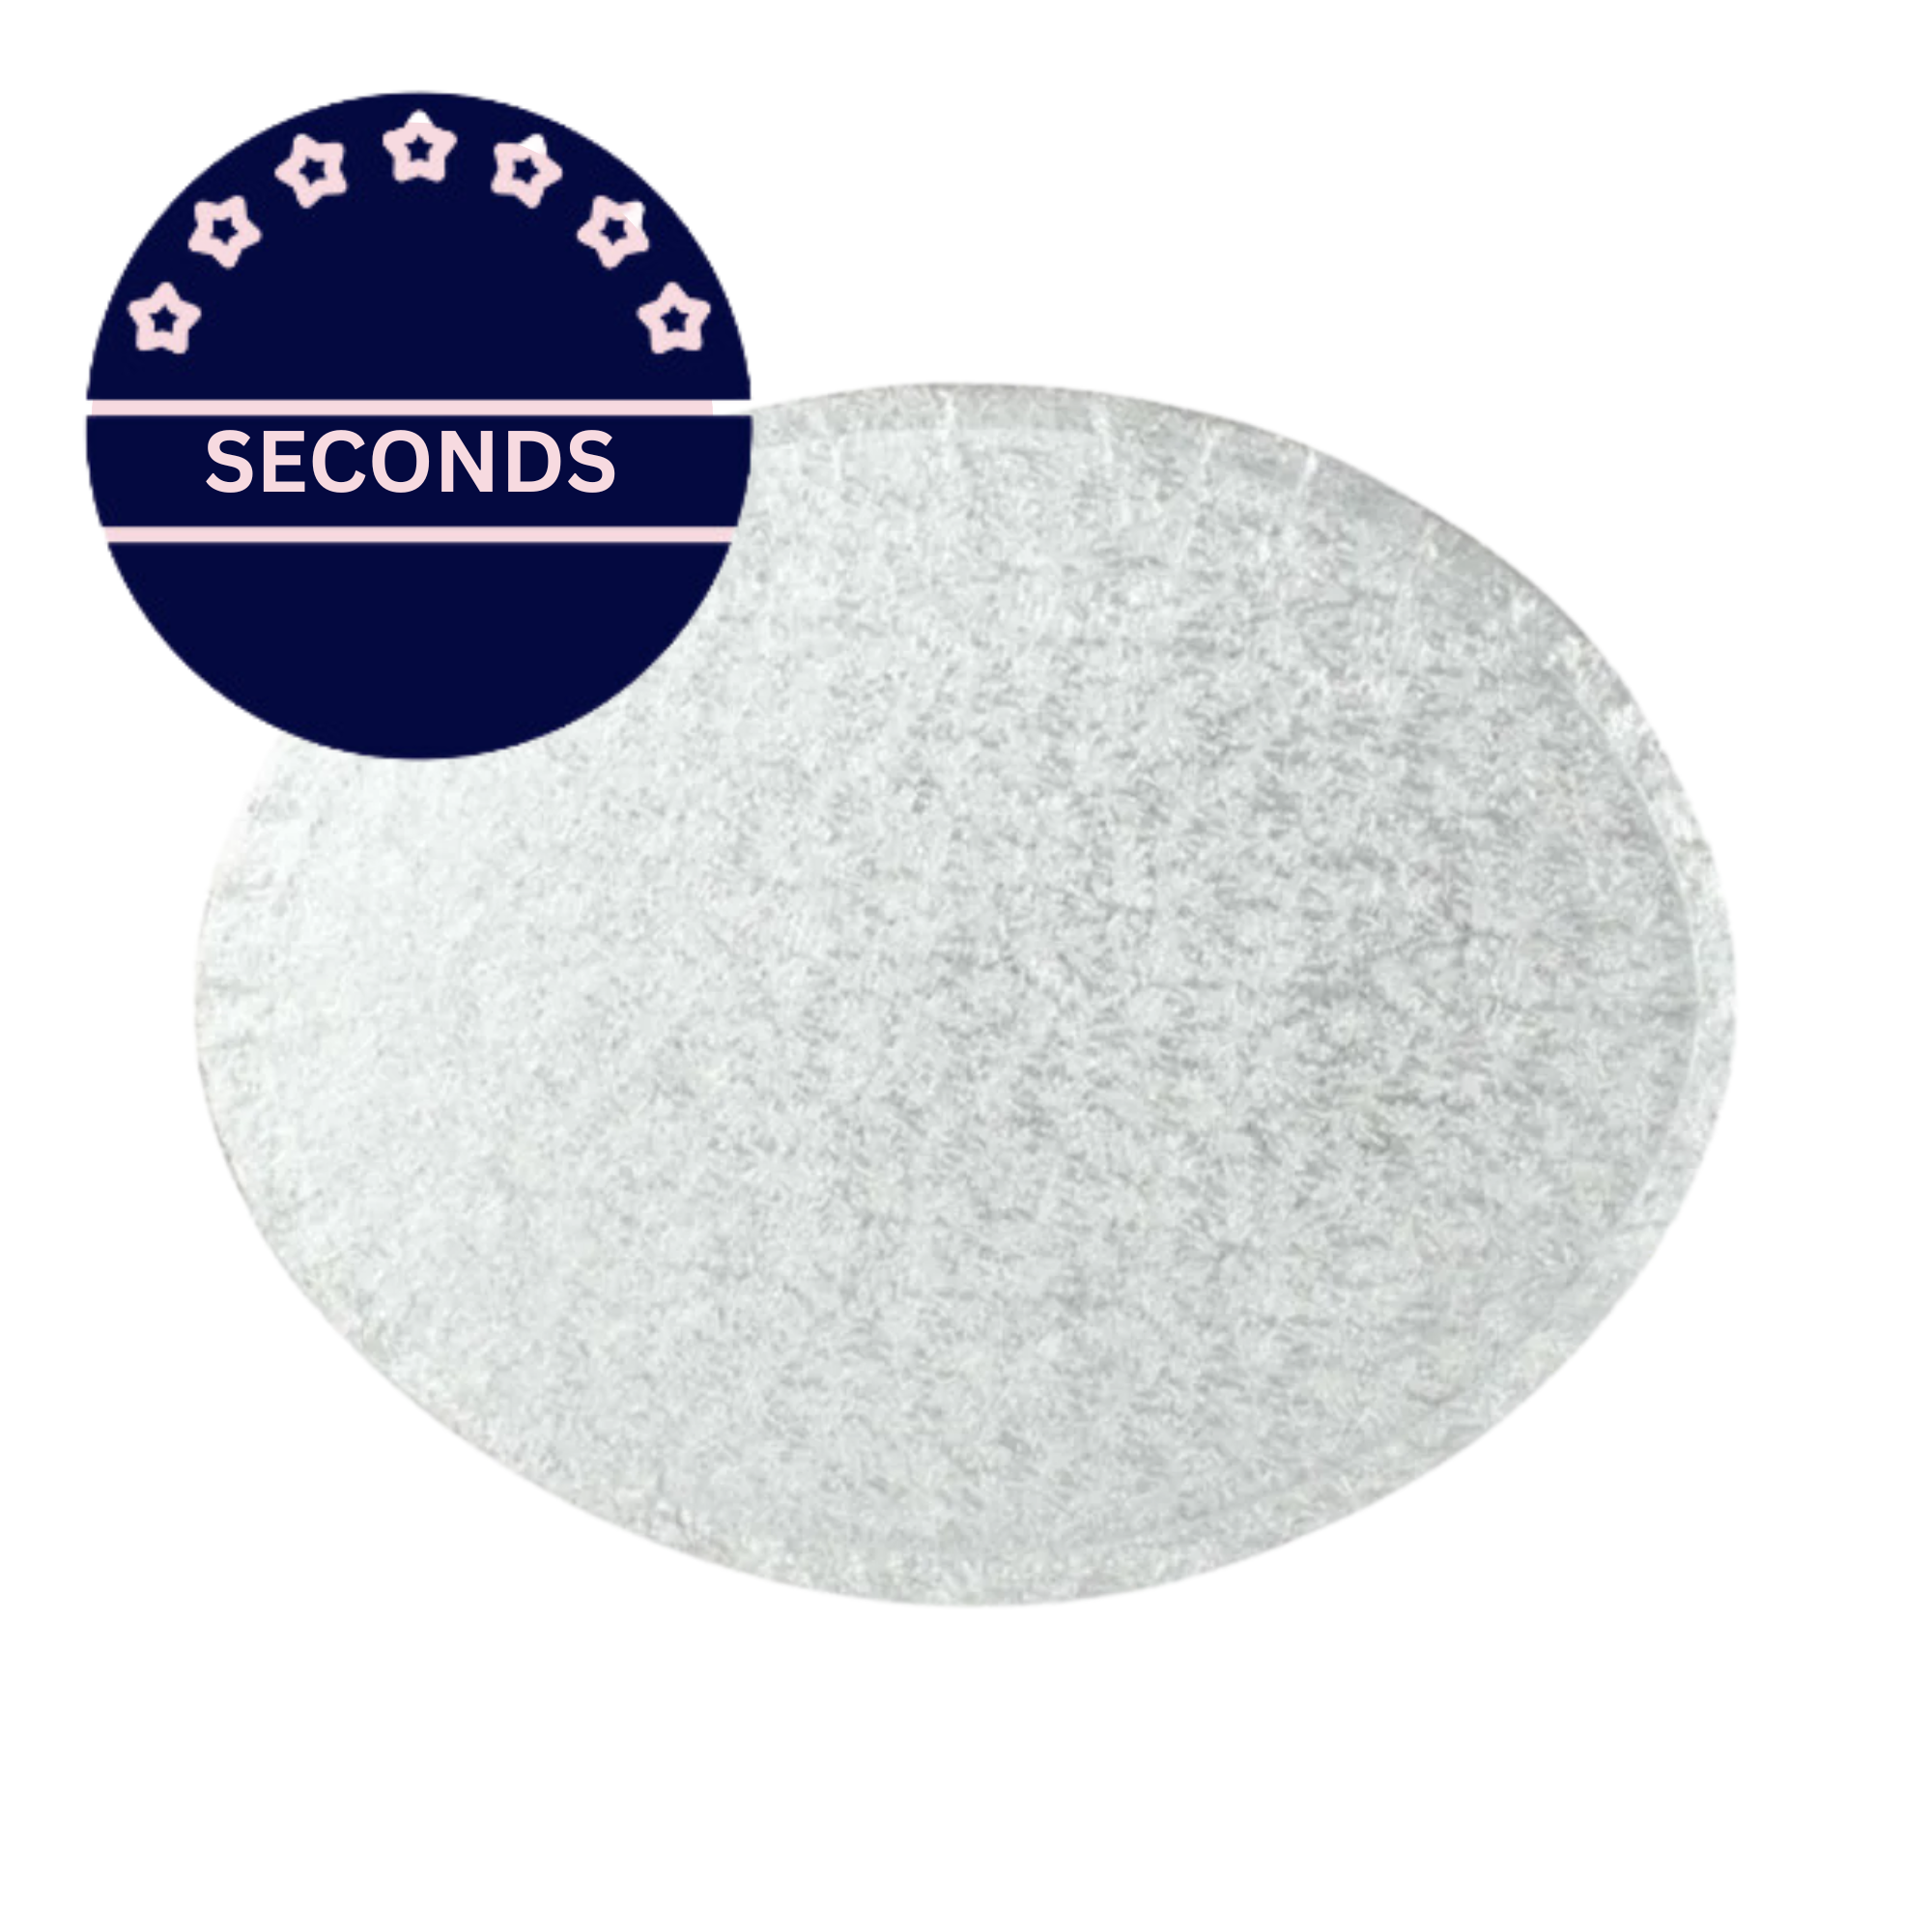 SECONDS - Oval Cake Drum 12mm Thick Cake Board - Silver - 16" x 14"